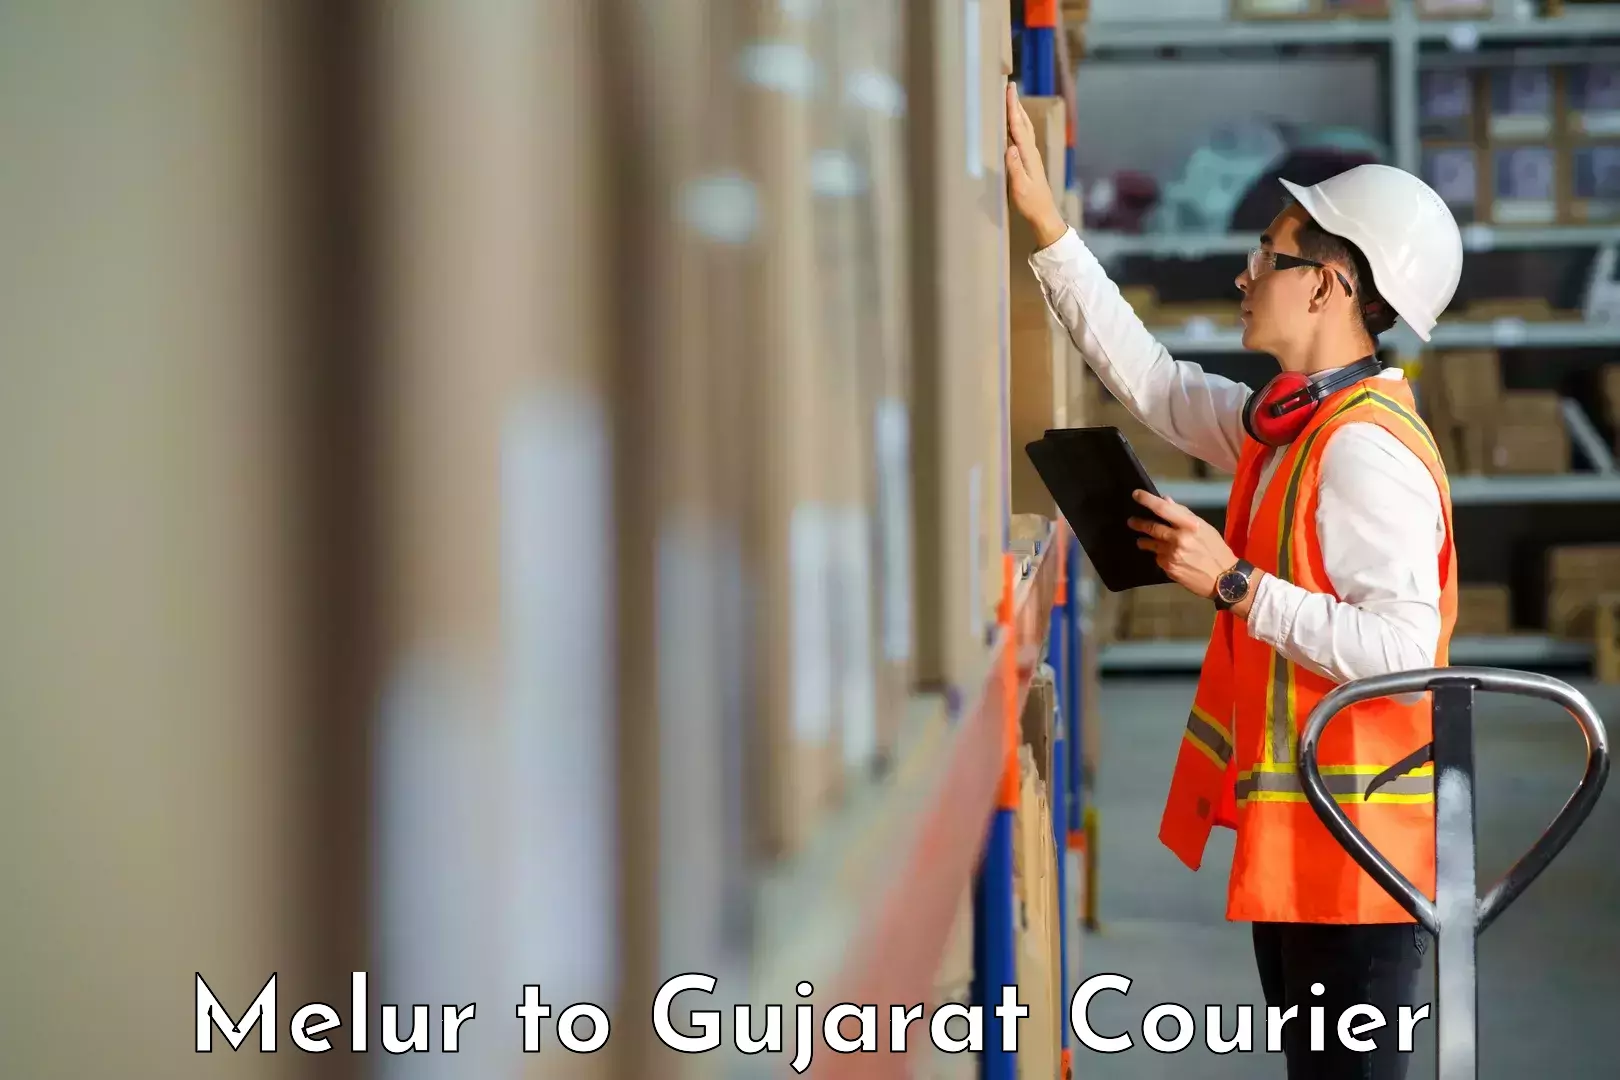 State-of-the-art courier technology Melur to Narmada Gujarat